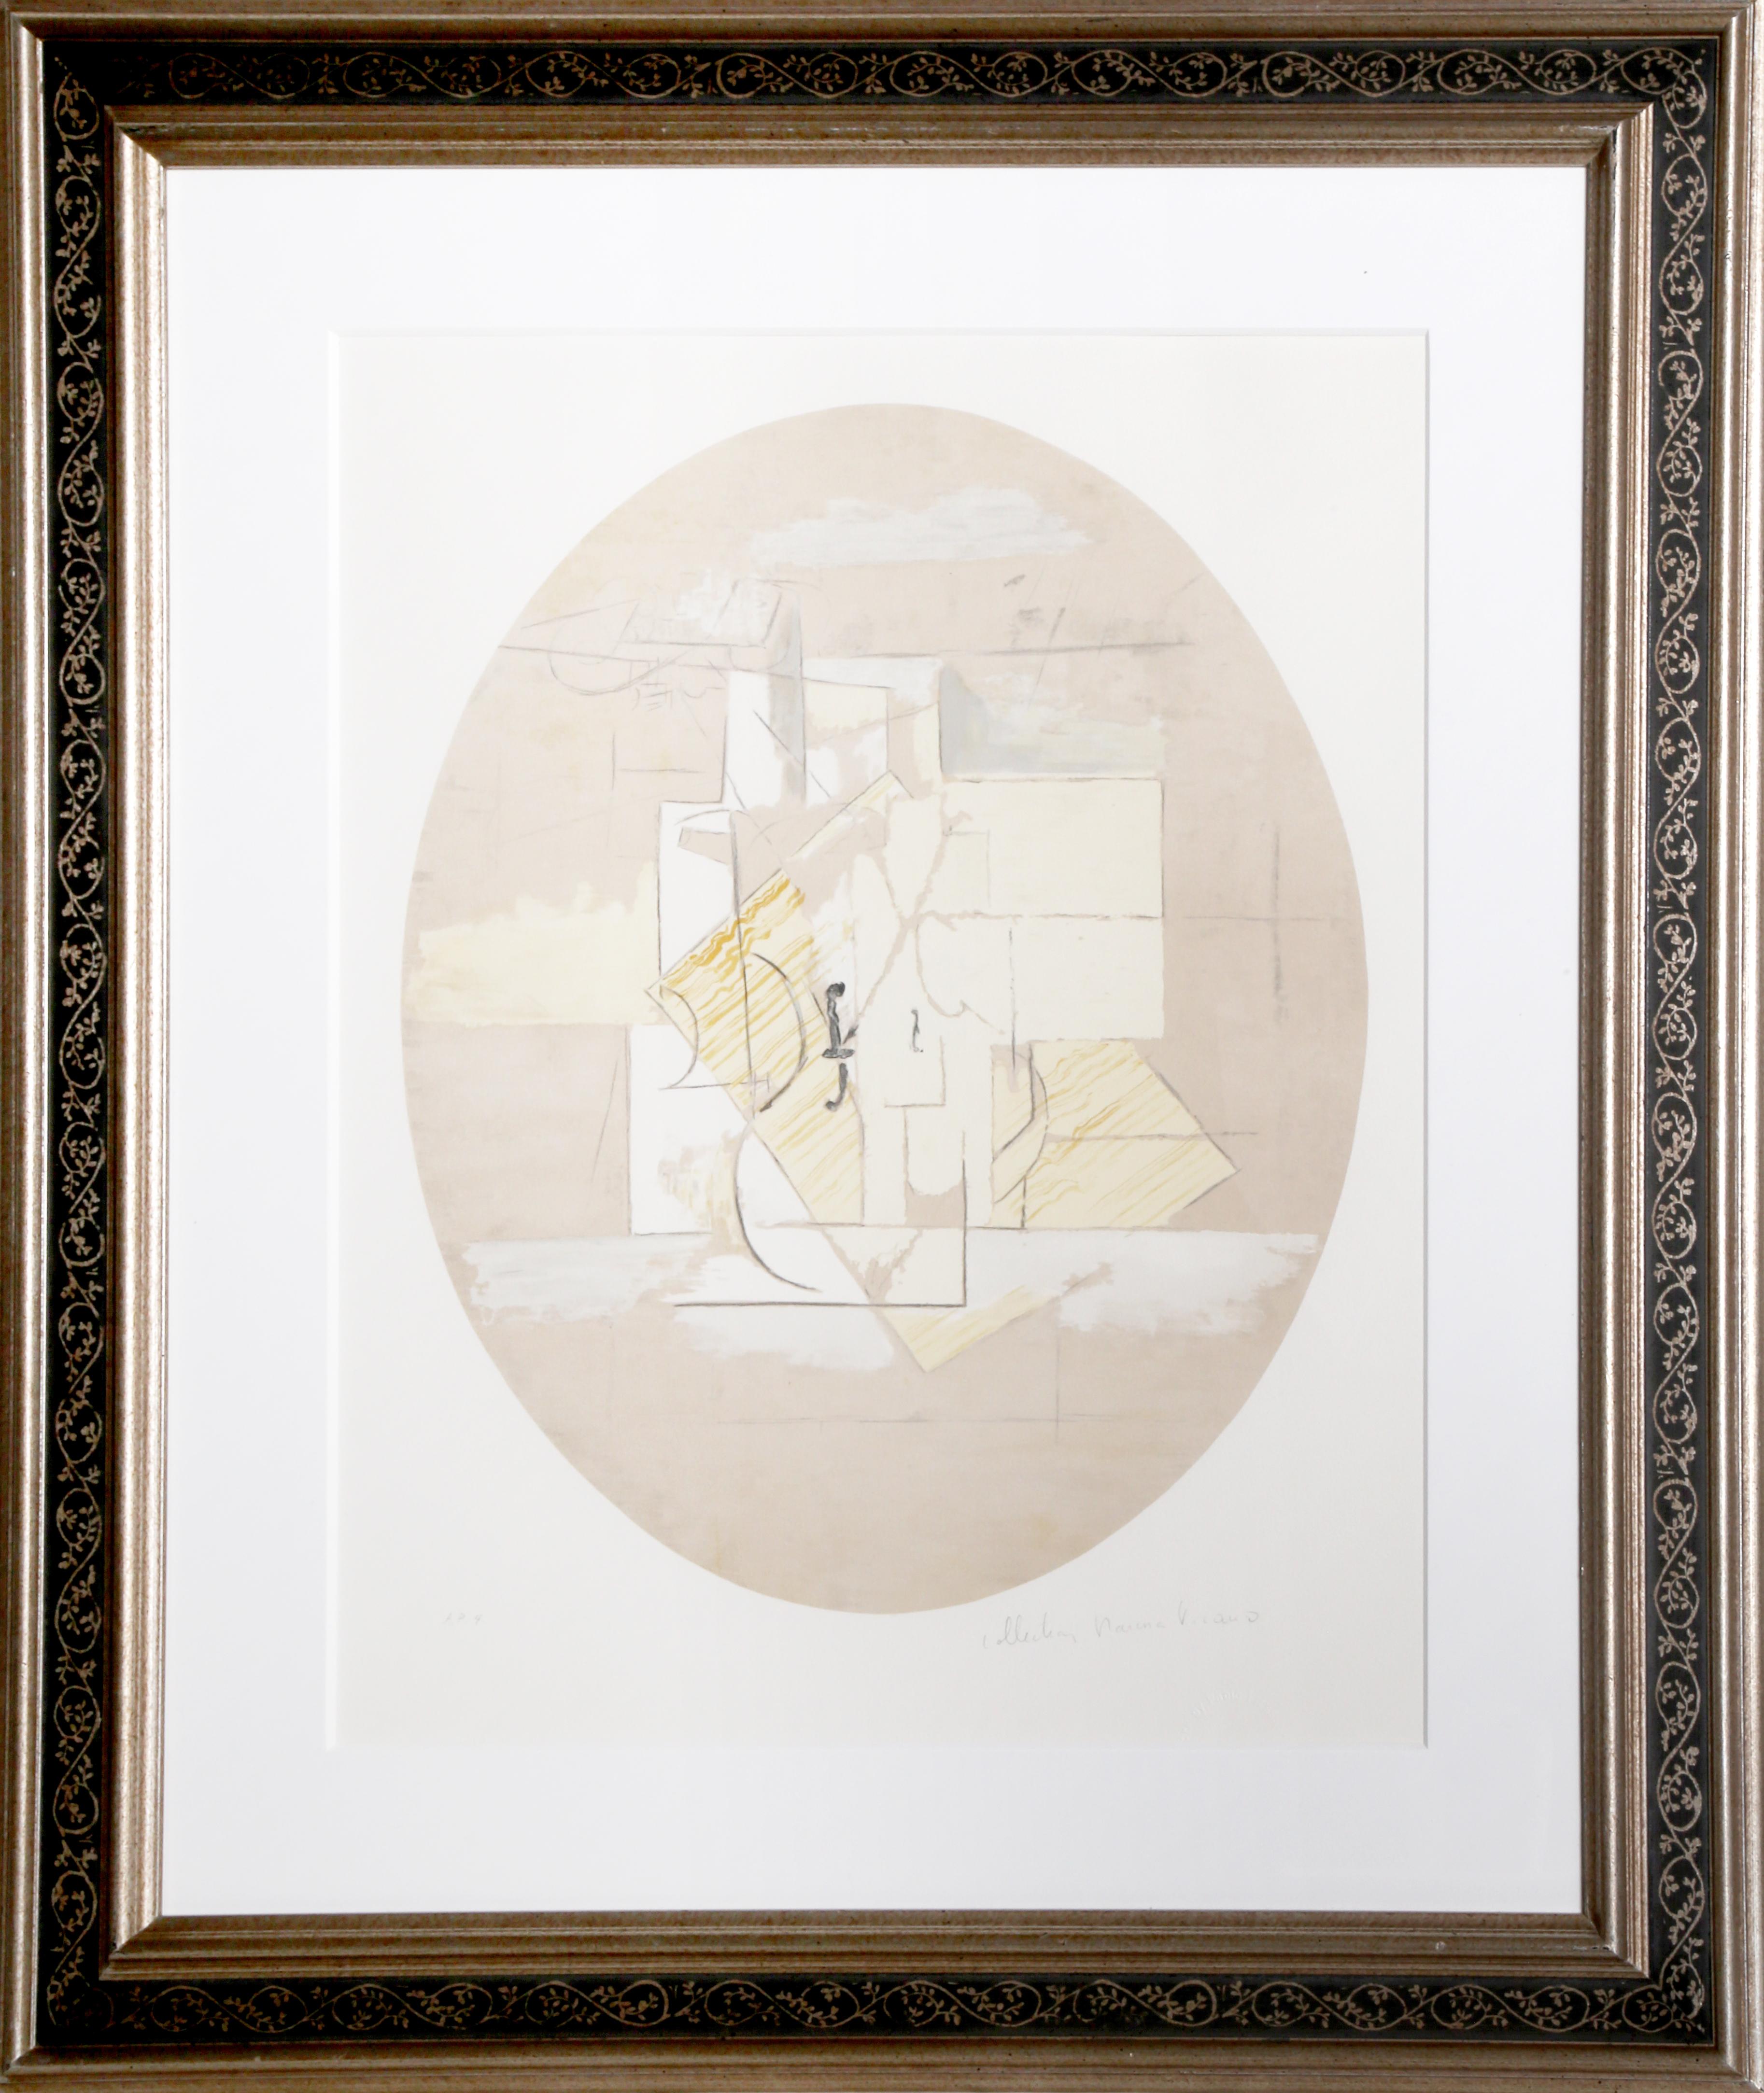 A lithograph from the Marina Picasso Estate Collection after the Pablo Picasso painting "Violon".  The original painting was completed in 1912. In the 1970's after Picasso's death, Marina Picasso, his granddaughter, authorized the creation of this